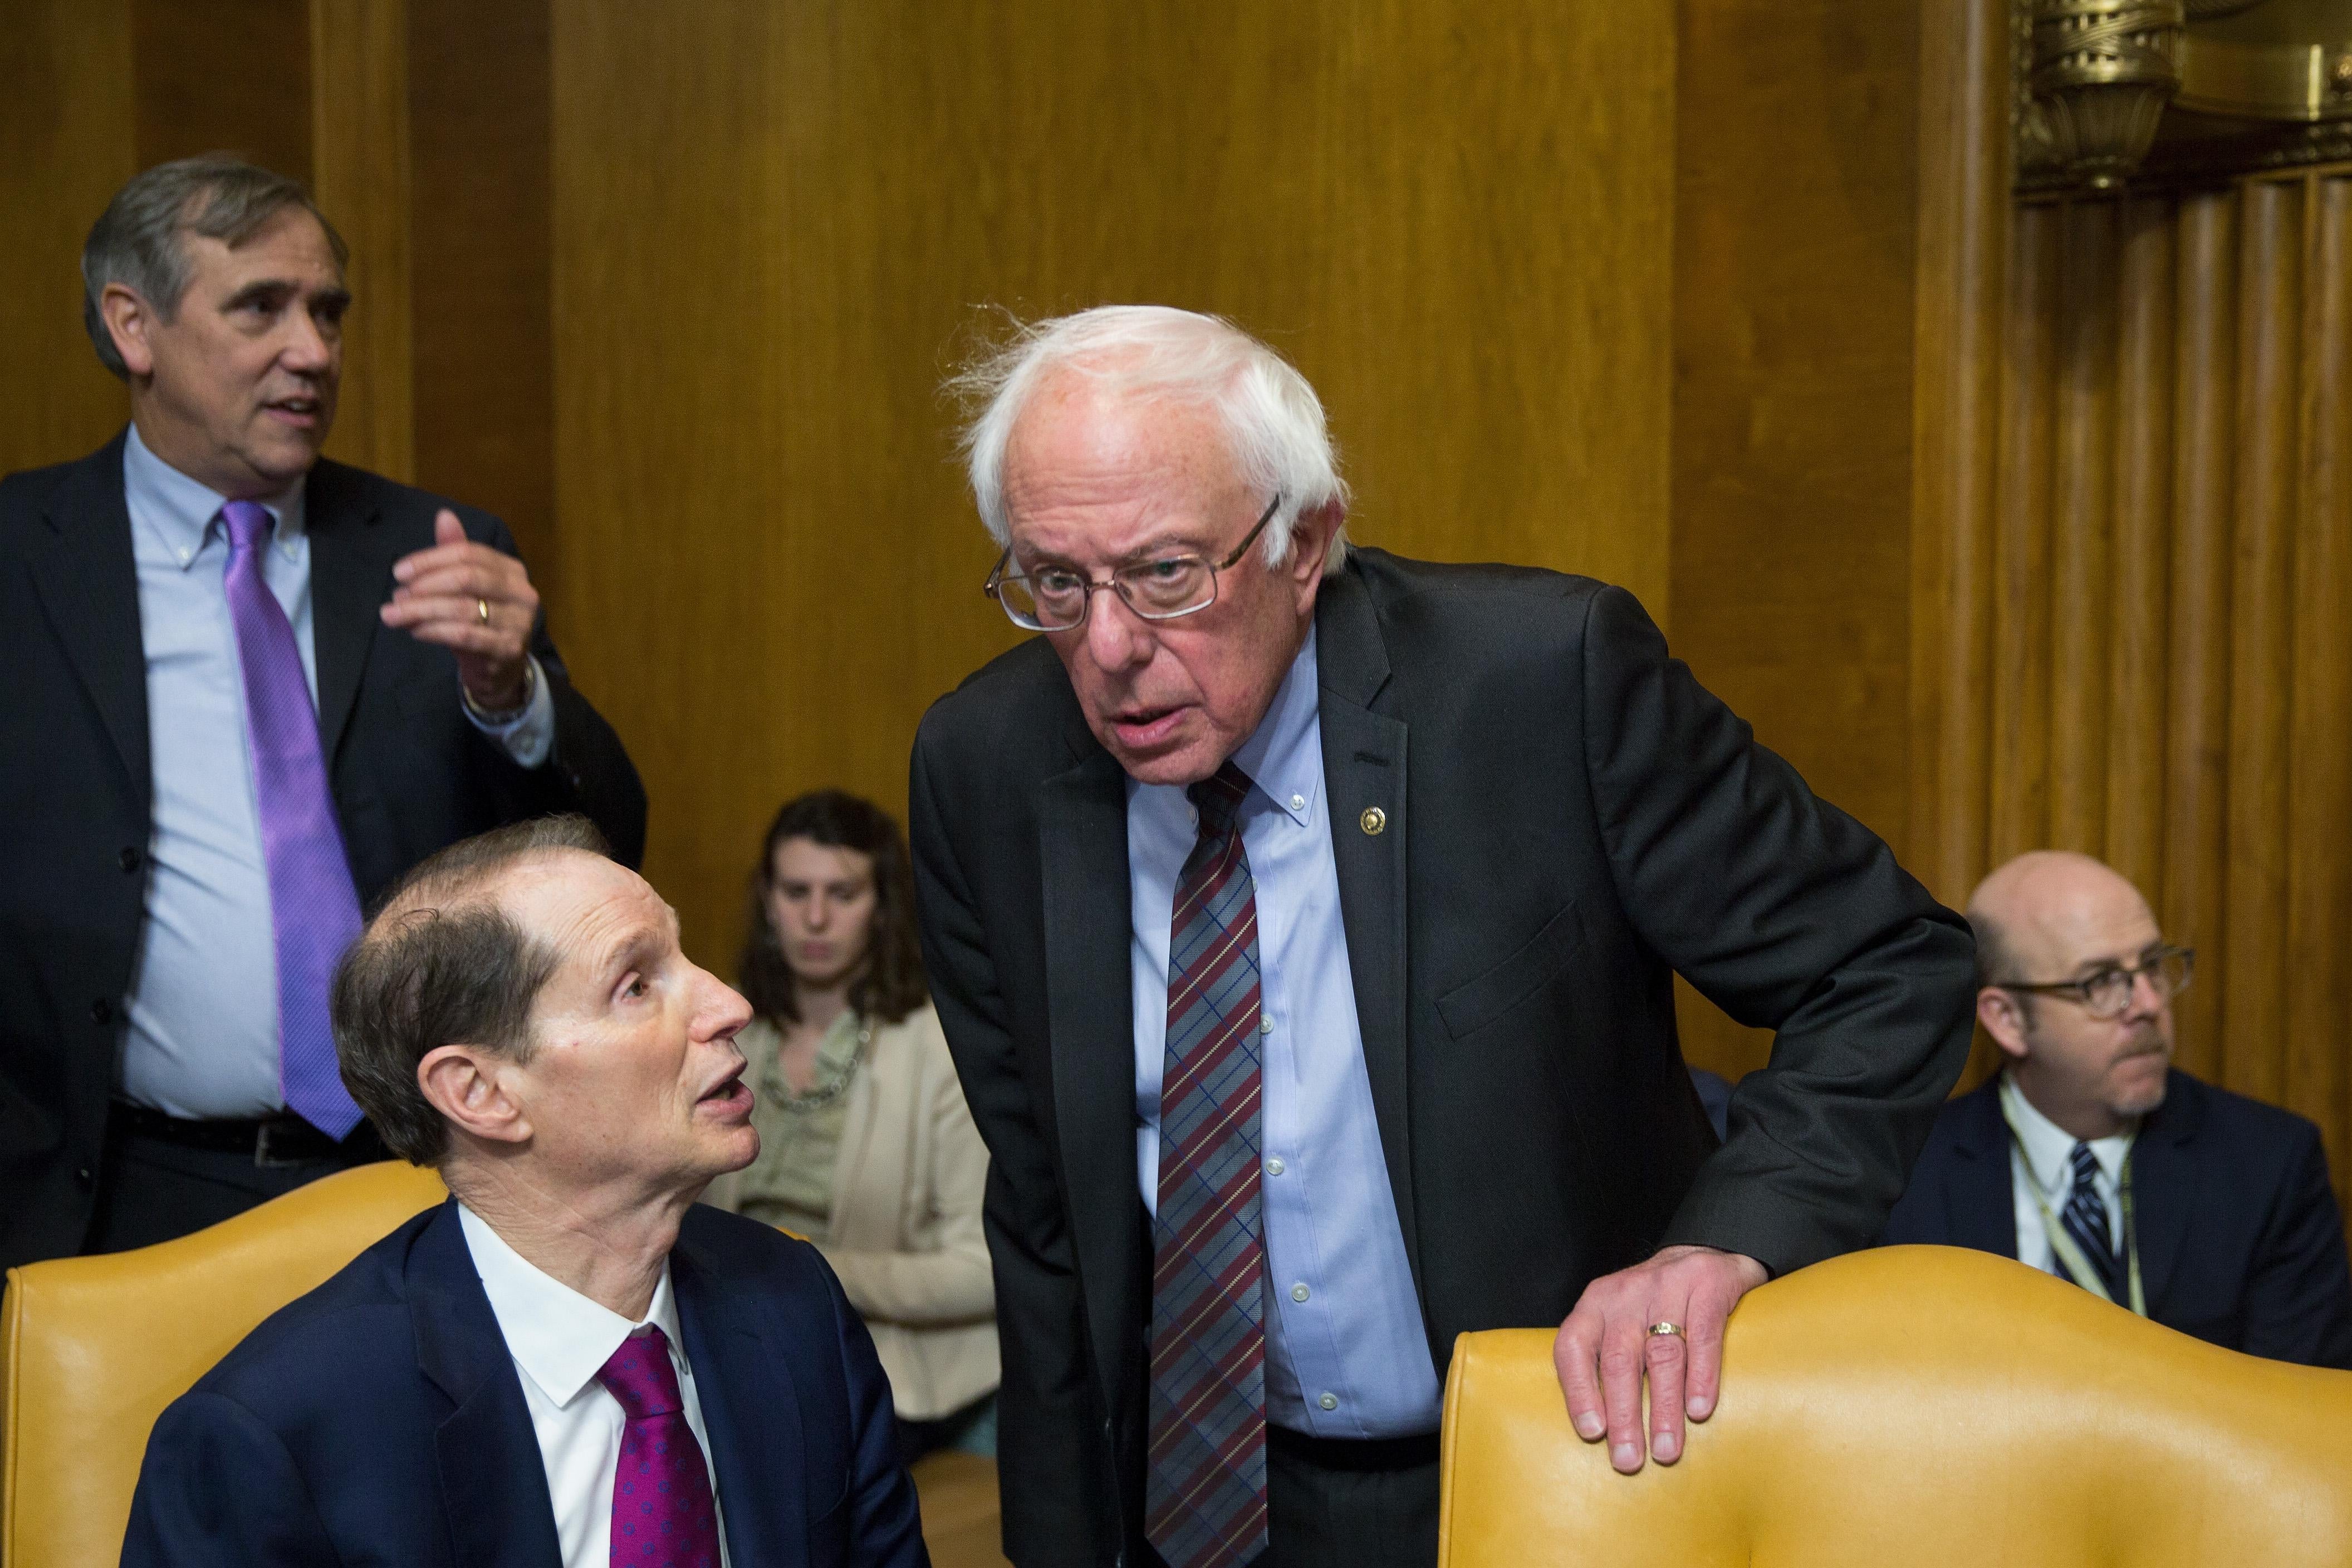 Ron Wyden speaks to Bernie Sanders, who looks quizzical, during a committee meeting